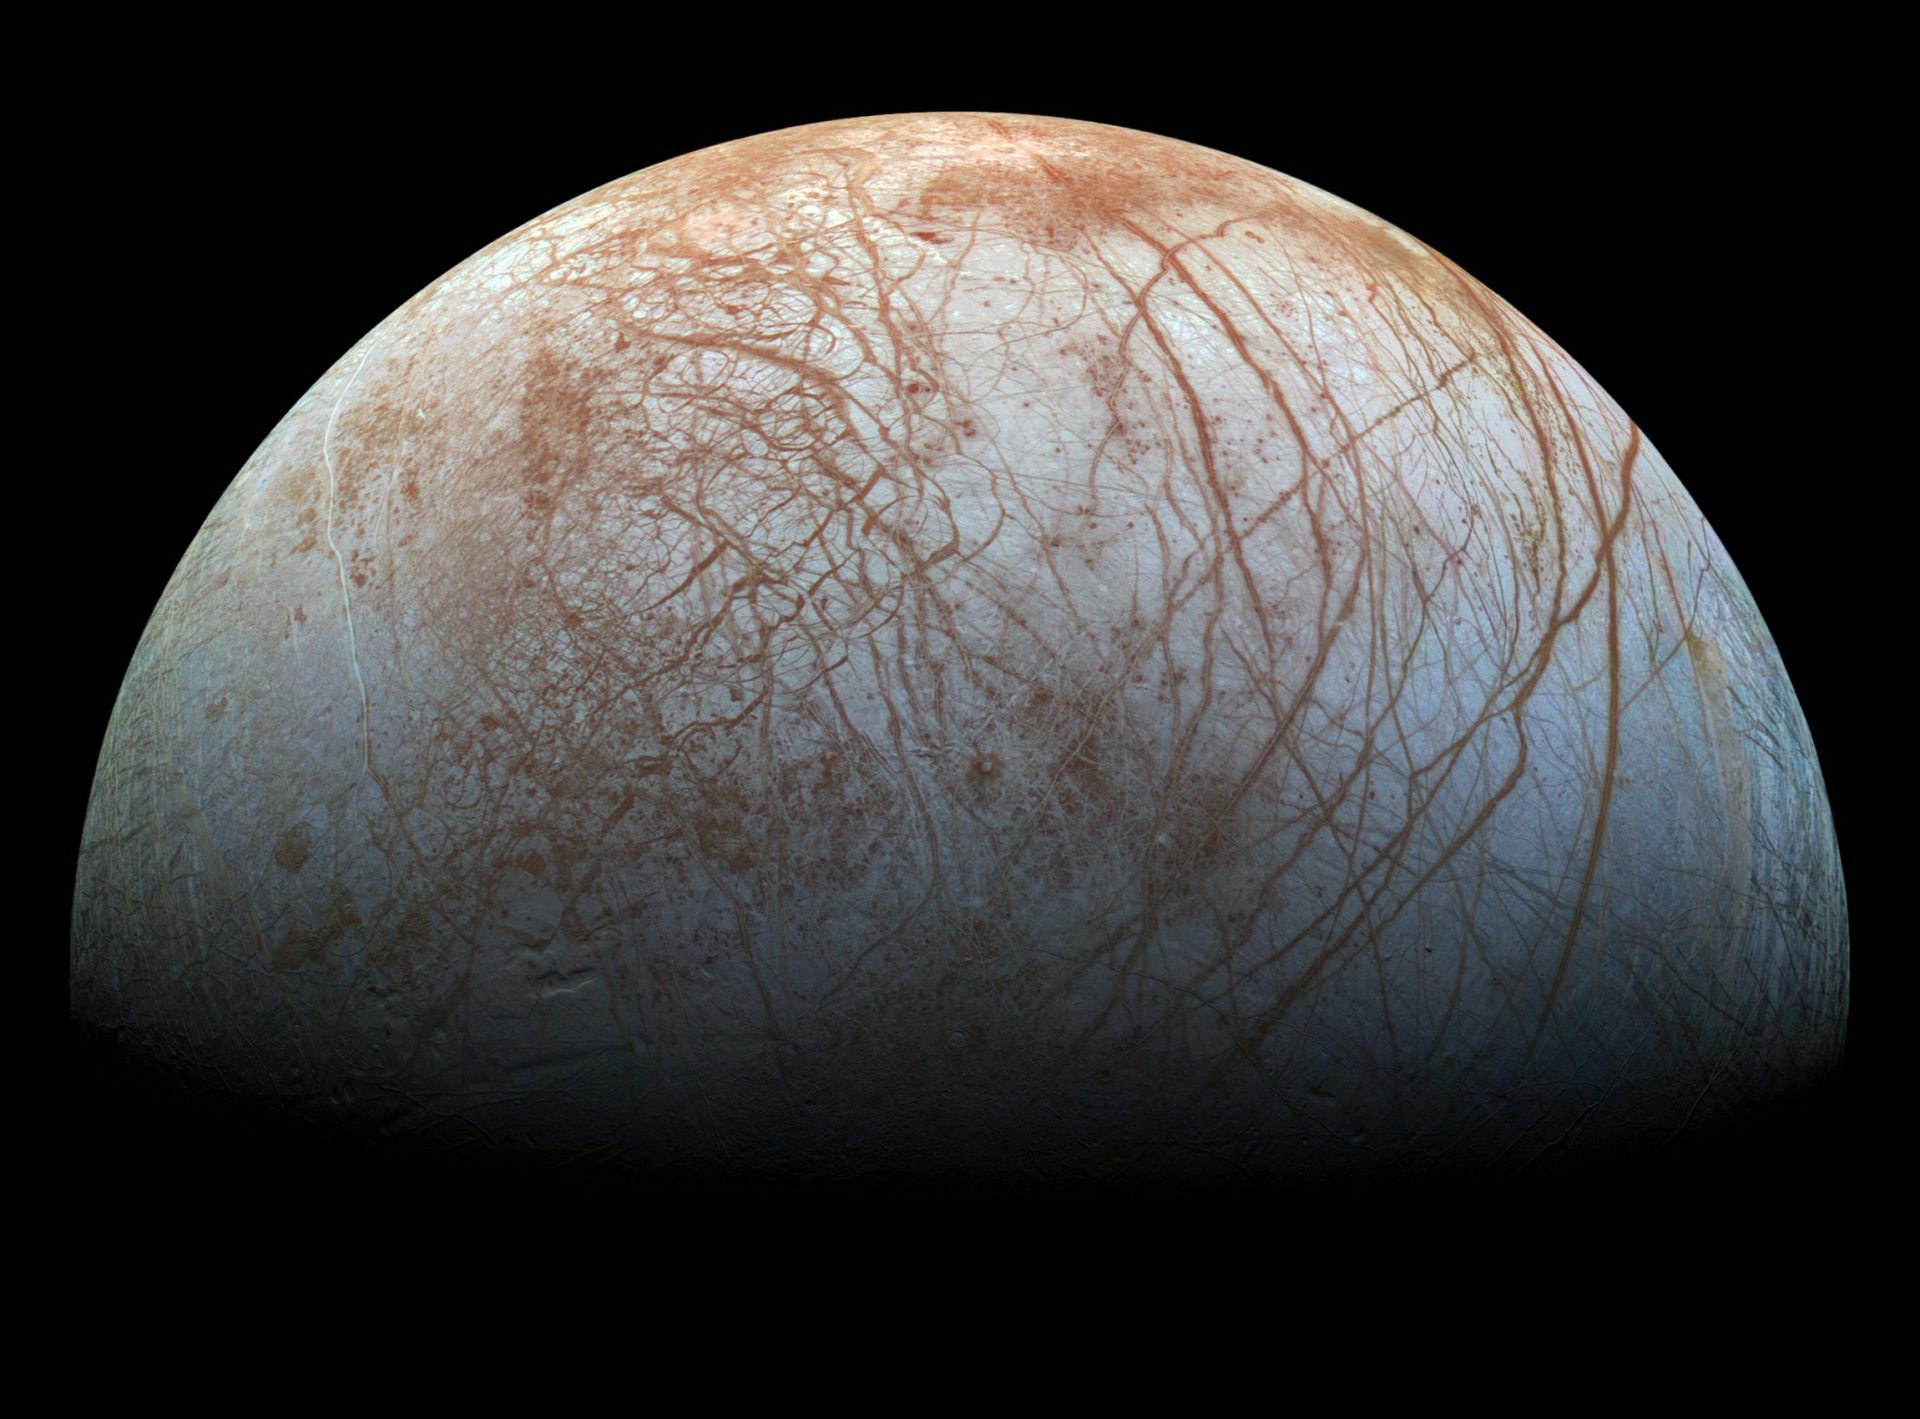 Heat gave Jupiter’s chilly moon Europa layers. That will almost definitely be staunch files for the ogle lifestyles.